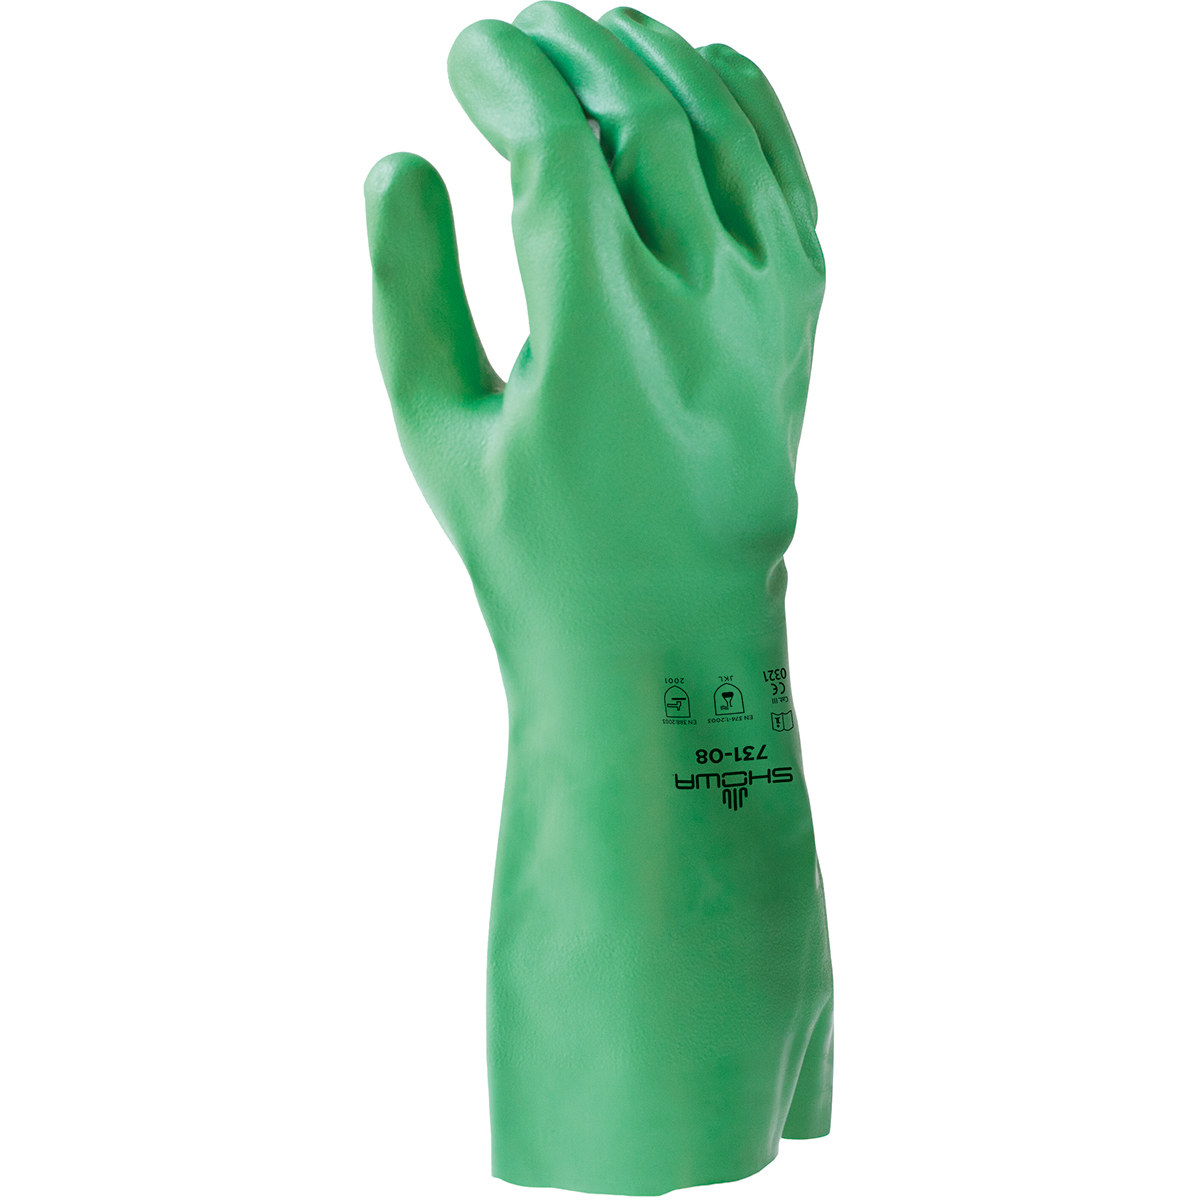 SHOWA® Green 15 mil Unsupported Biodegradable Nitrile Chemical Resistant Gloves